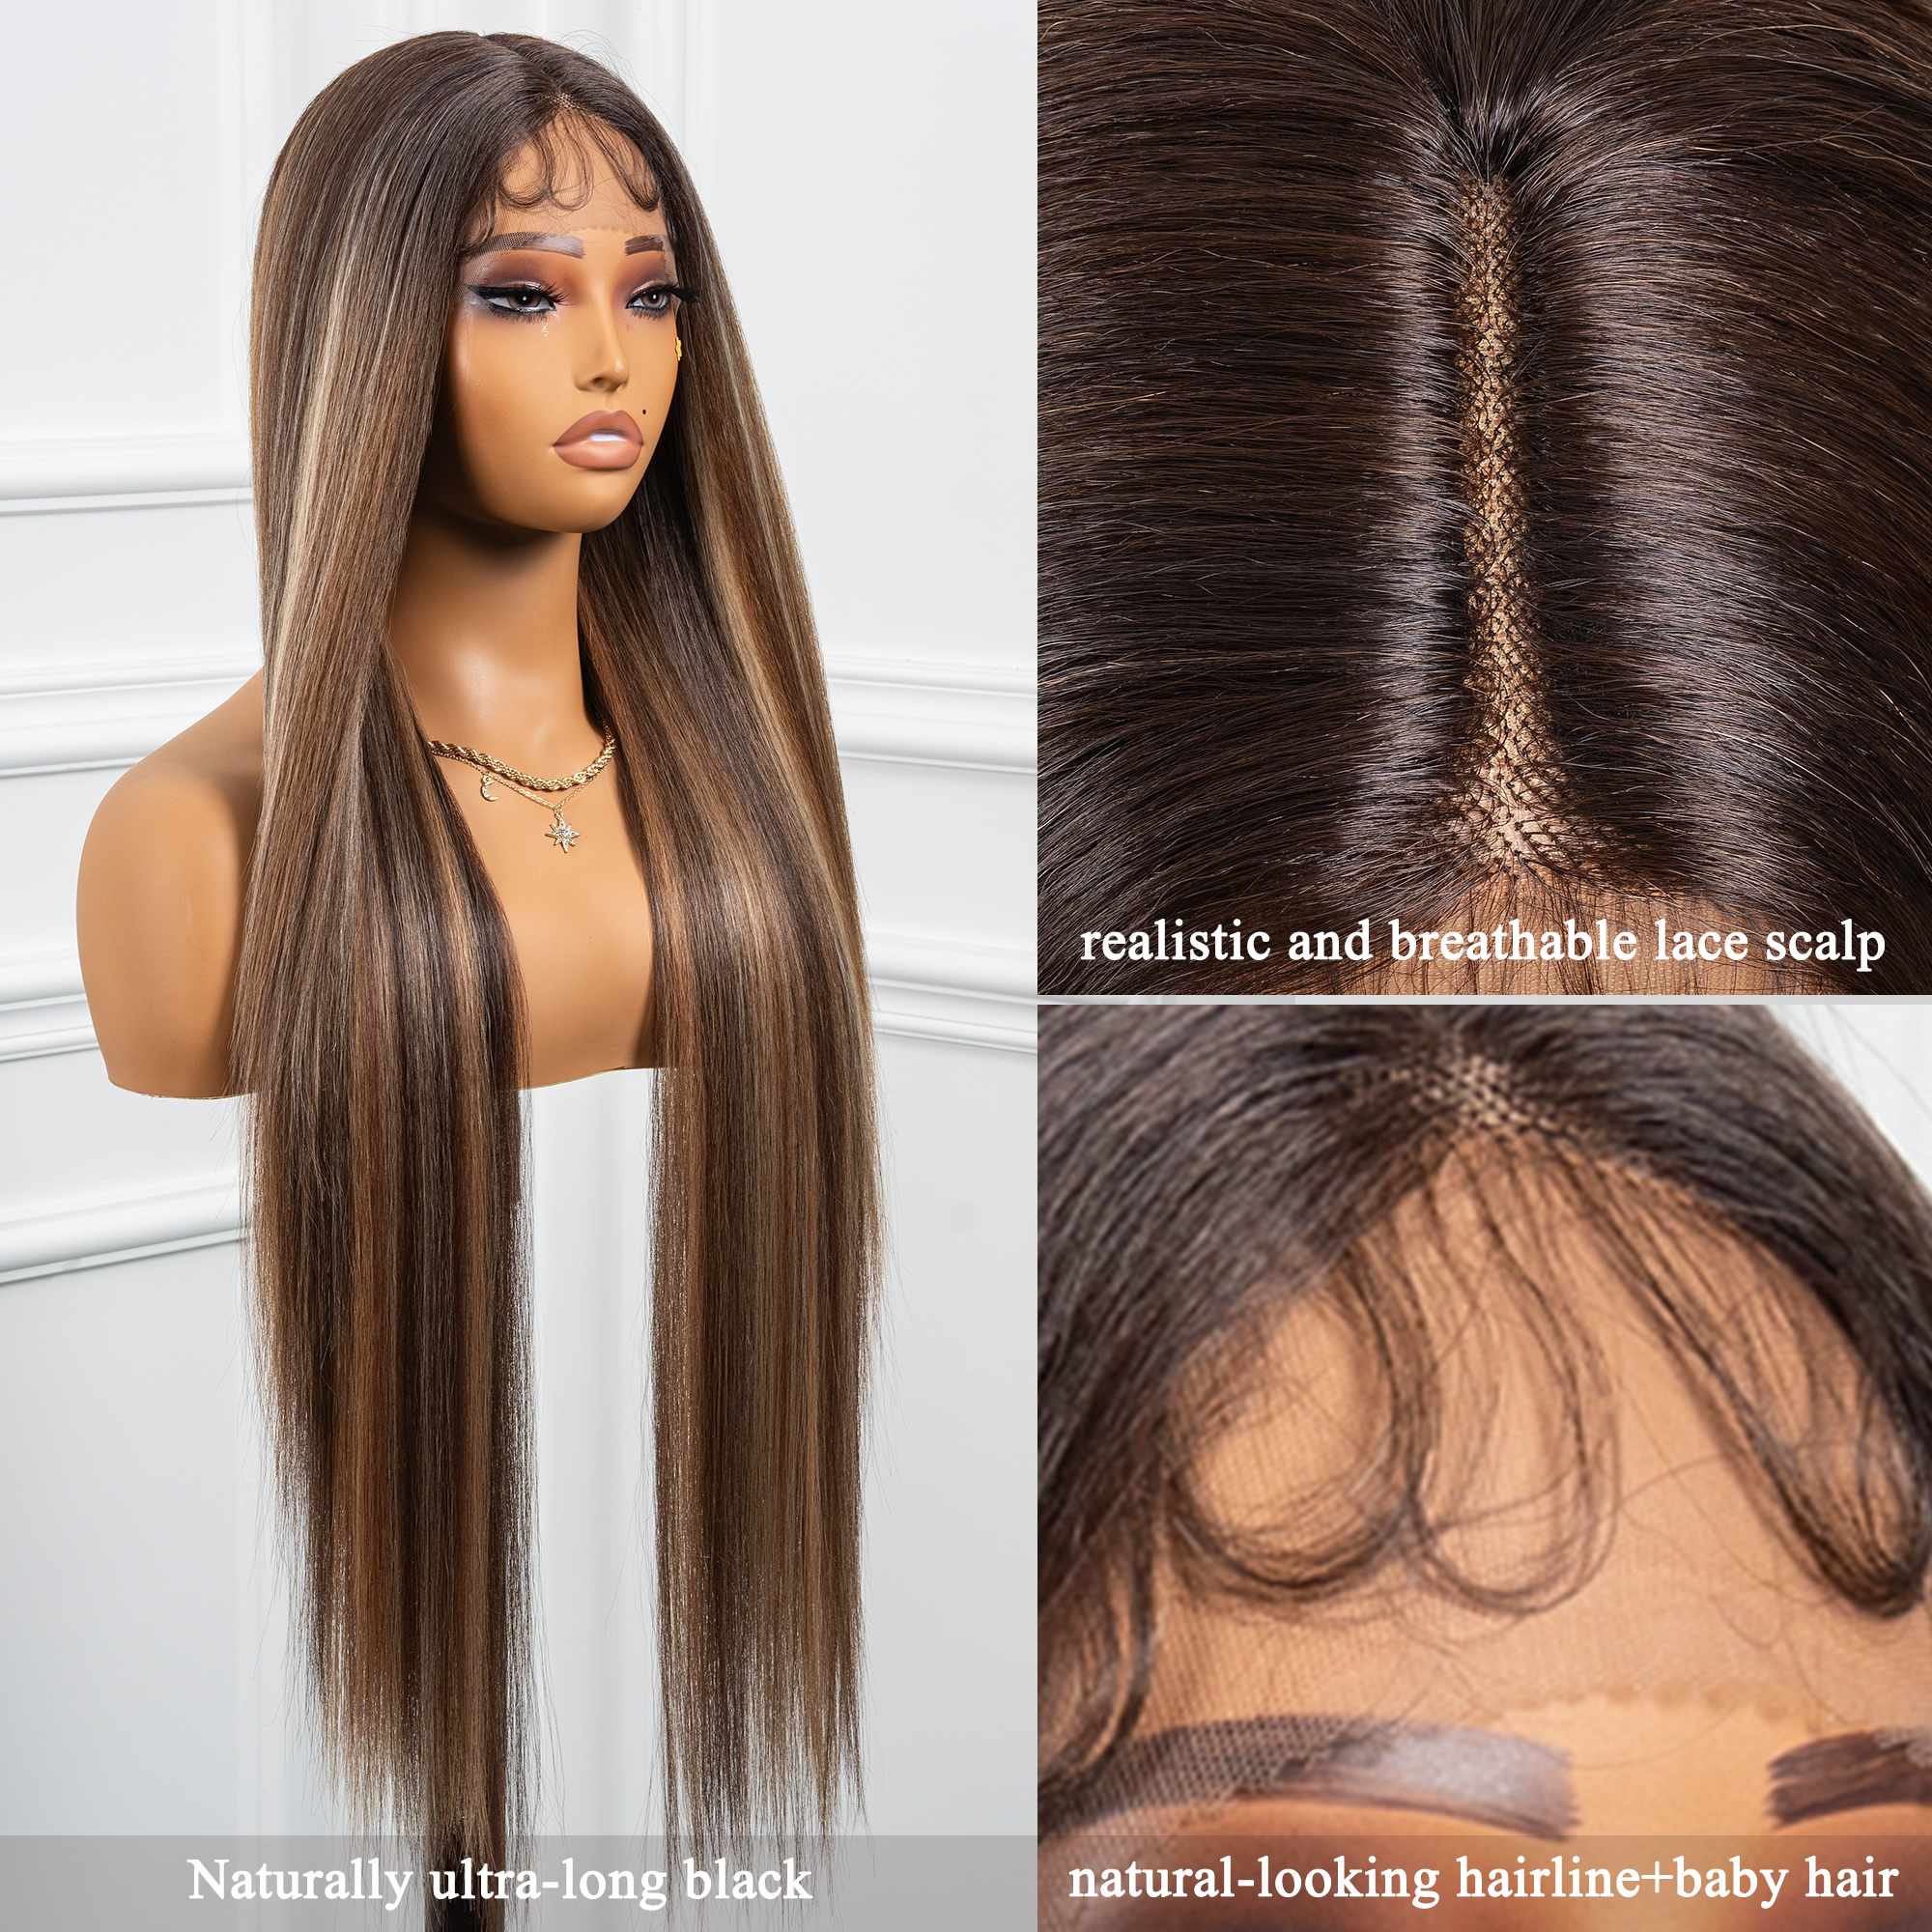 𝗣𝗶𝘀𝗰𝗲𝘀 | Toyotress Airy Yaki Straight T-middle Part Lace Front Wigs with Baby Hair | 20-32 Inch Long Soft Human Hair Rival Brown With Piano Highlights Wig(1472)